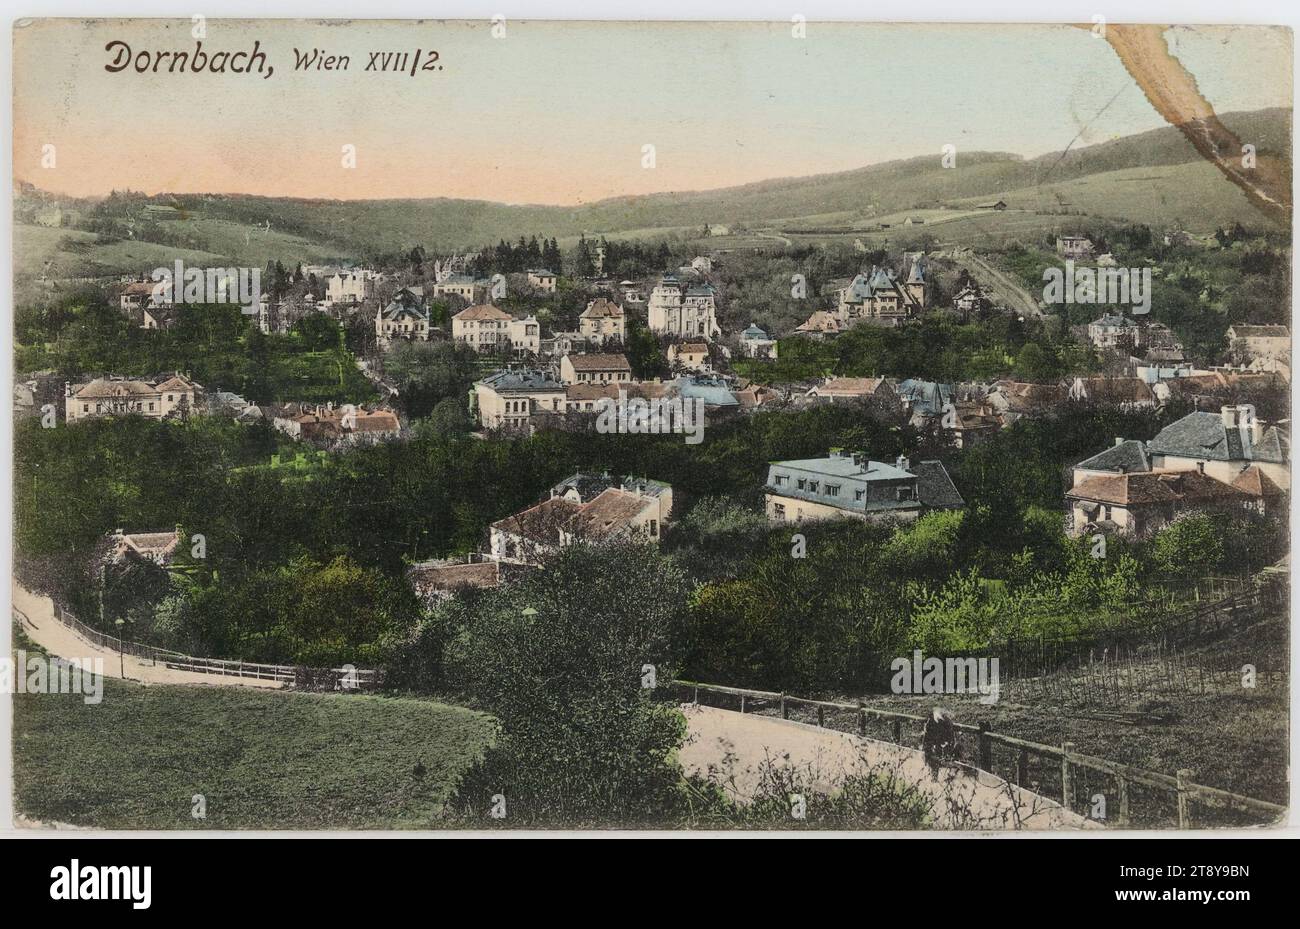 17th, Panorama of Dornbach, picture postcard, Paul Ledermann (1882-1946), producer, 1912, cardboard, hand colored, collotype, inscription, ZU, Vienna, ADDRESS, [recipient and Salzburg address crossed out], Vienna 17, 2, Zwerngasse 16, MESSAGE, Wohlgebo. gnädige Frau!, In a hurry I report that the samples, which are marked, have not arrived at Richter, and therefore only random ones are taken where the rest of the section is still here, otherwise my work forces are delayed and time-consuming. Handkuss [signature], Wienerwald, media and communication, postcards with transliteration Stock Photo